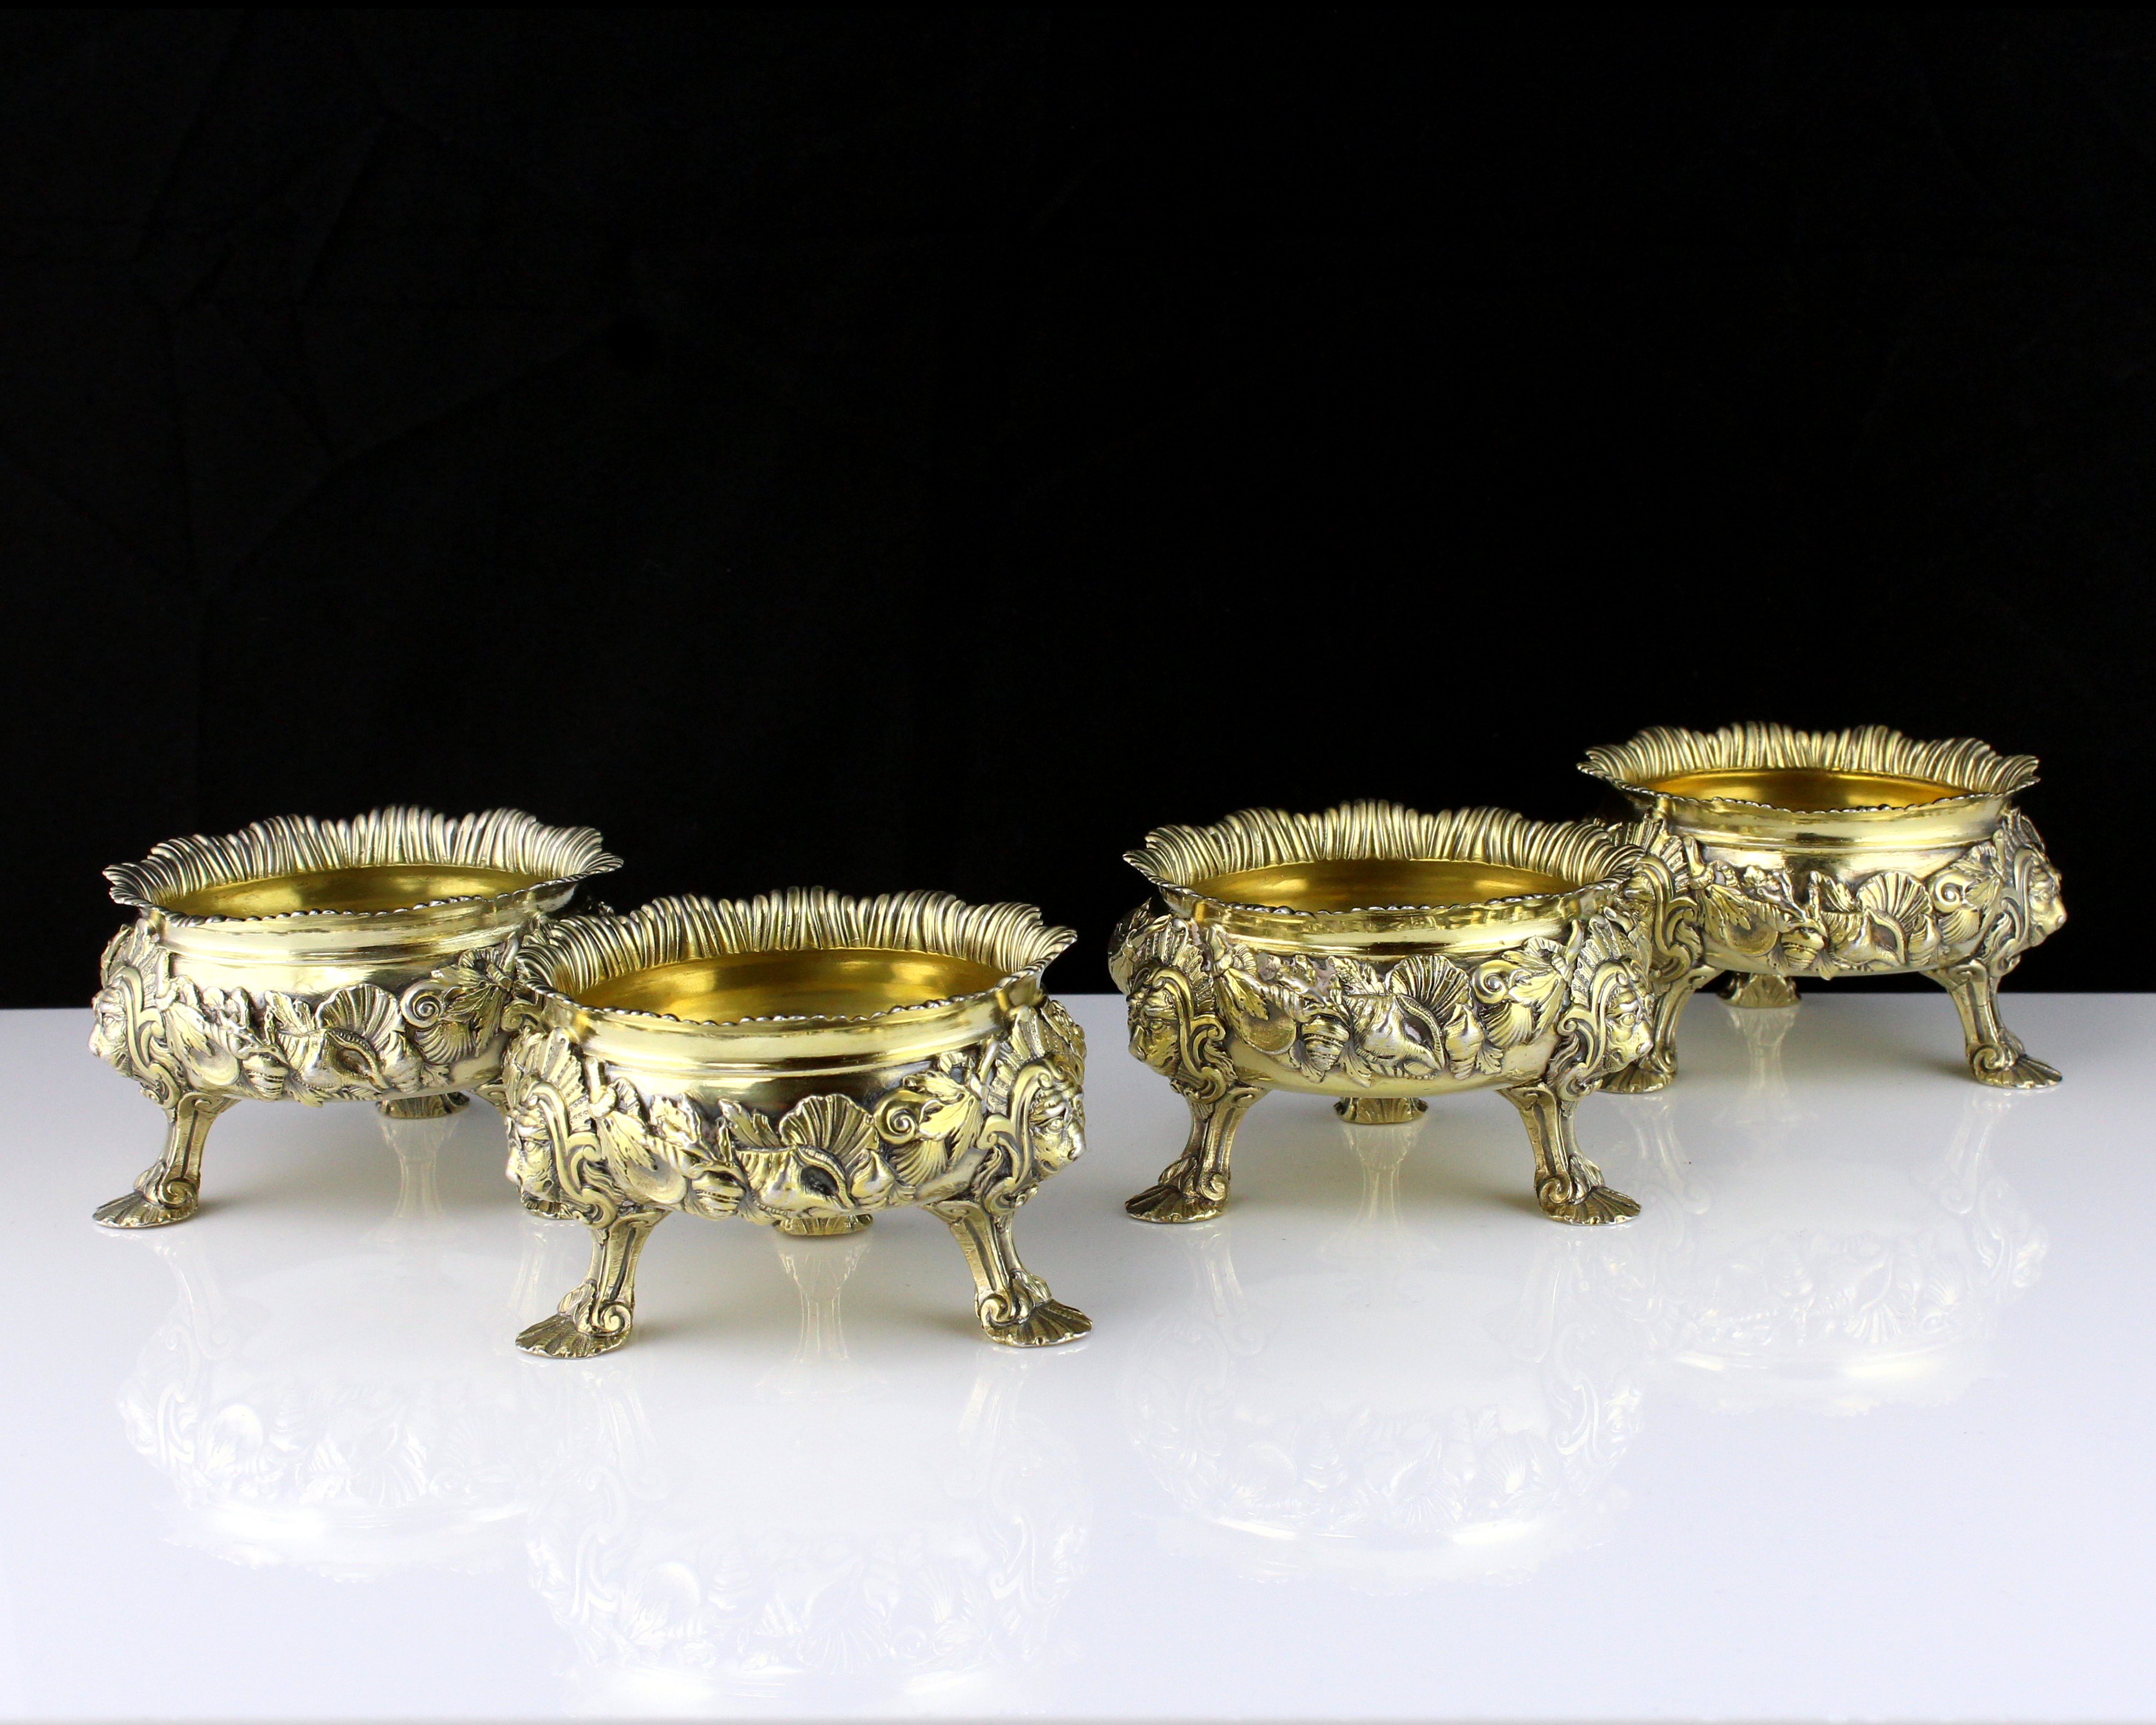 A set of four antique George II Sterling Silver gilt salt cellars by Peter White, London 1746 of